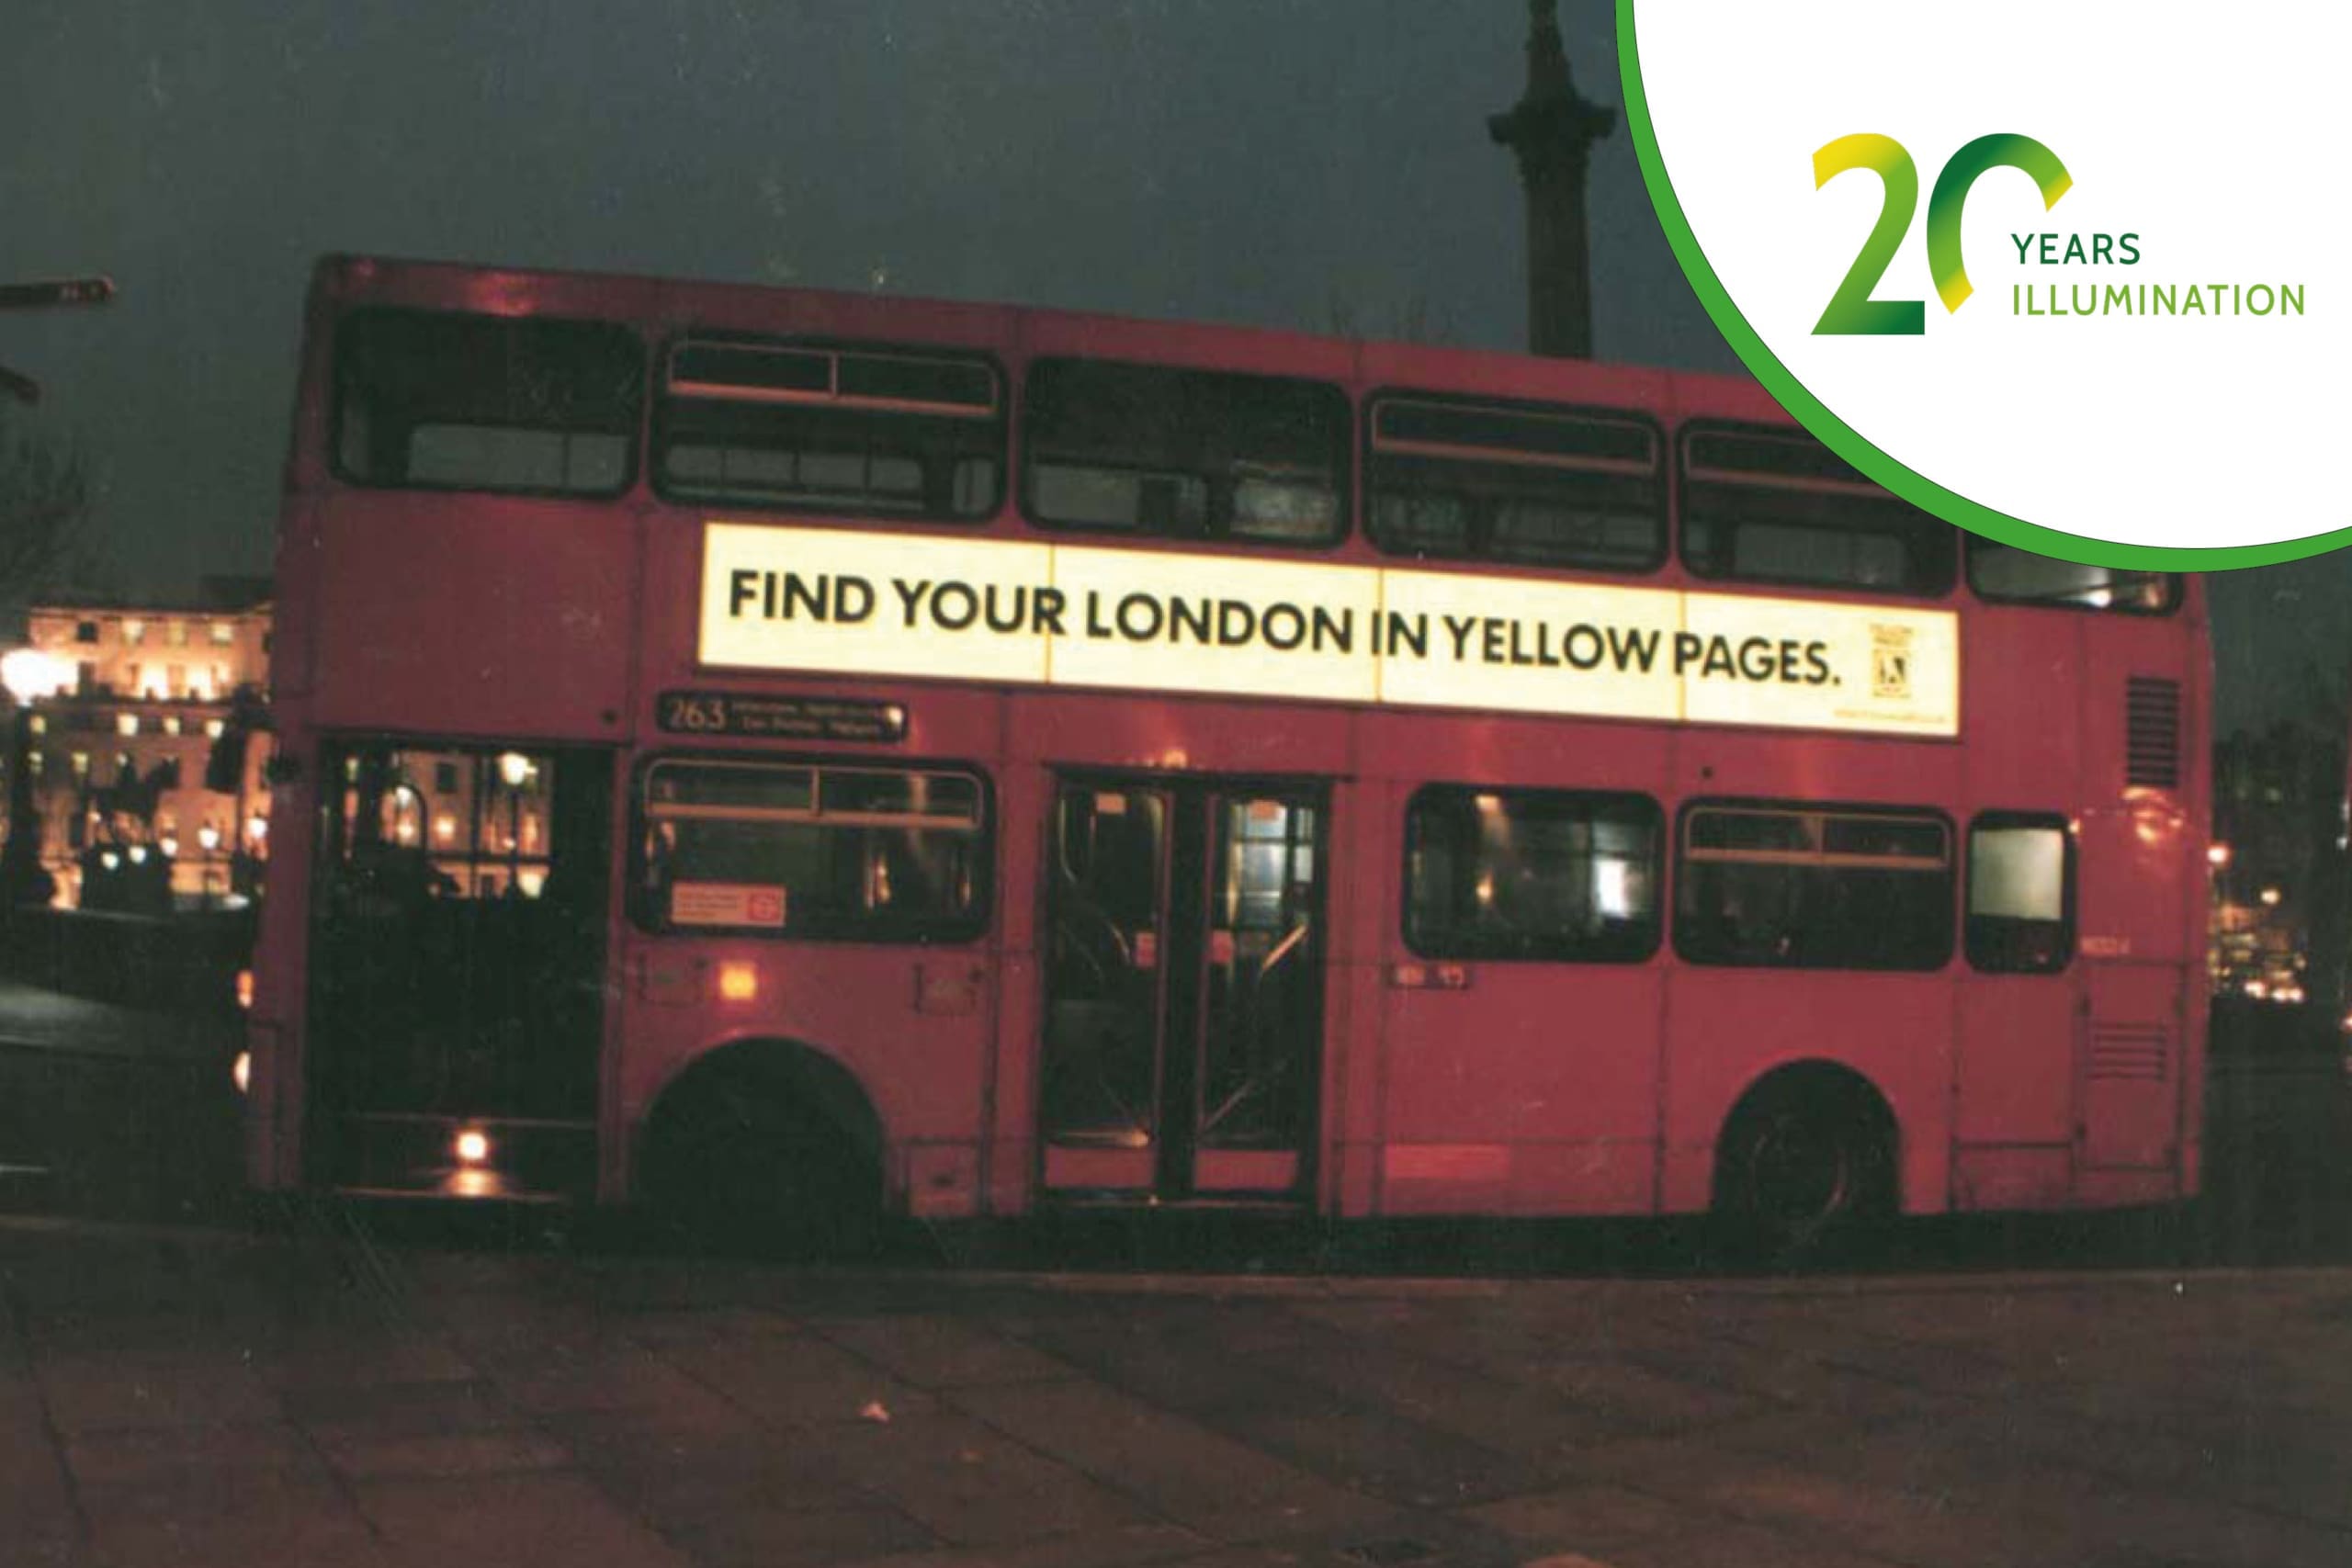 A classic red double-decker bus in London at night features an illuminated advertisement on the side that reads, "Find your London in Yellow Pages." Celebrating "20 Years of Illumination".